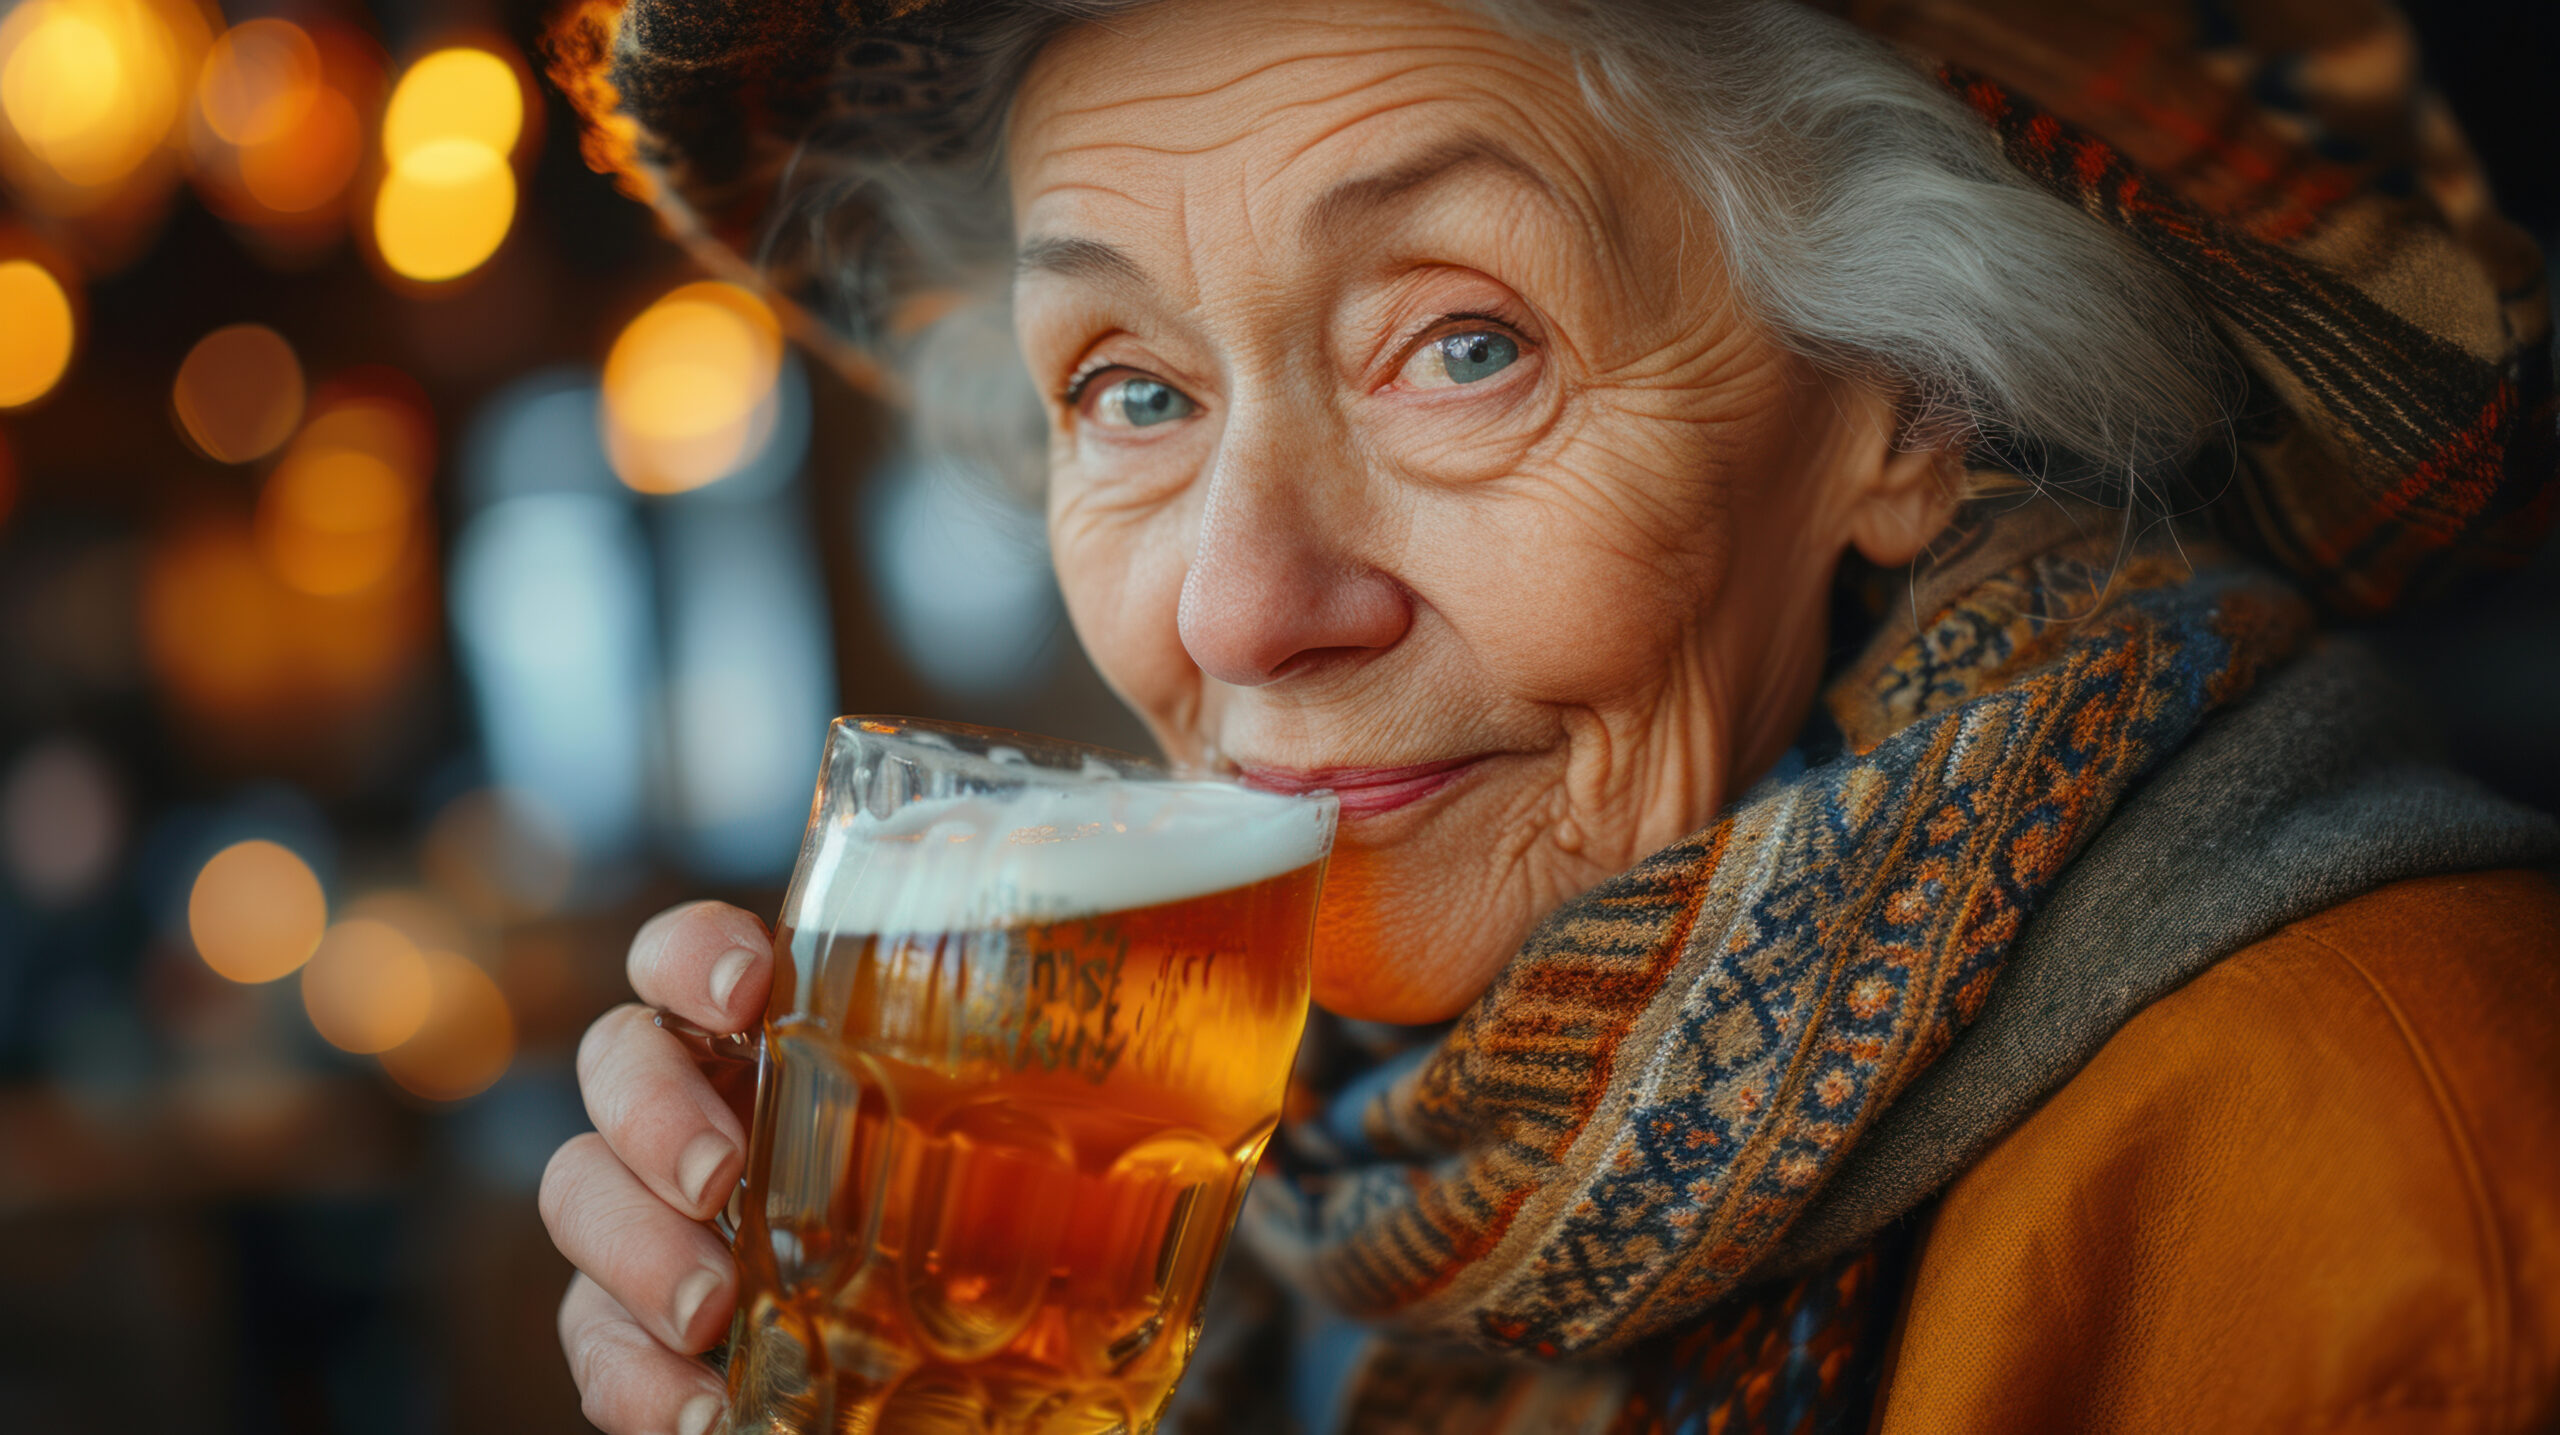 an aged woman with grey hair sips on a glass of beer. She is smirking at the camera and making eye contact. She is wearing an orange shirt and a scarf and hat.